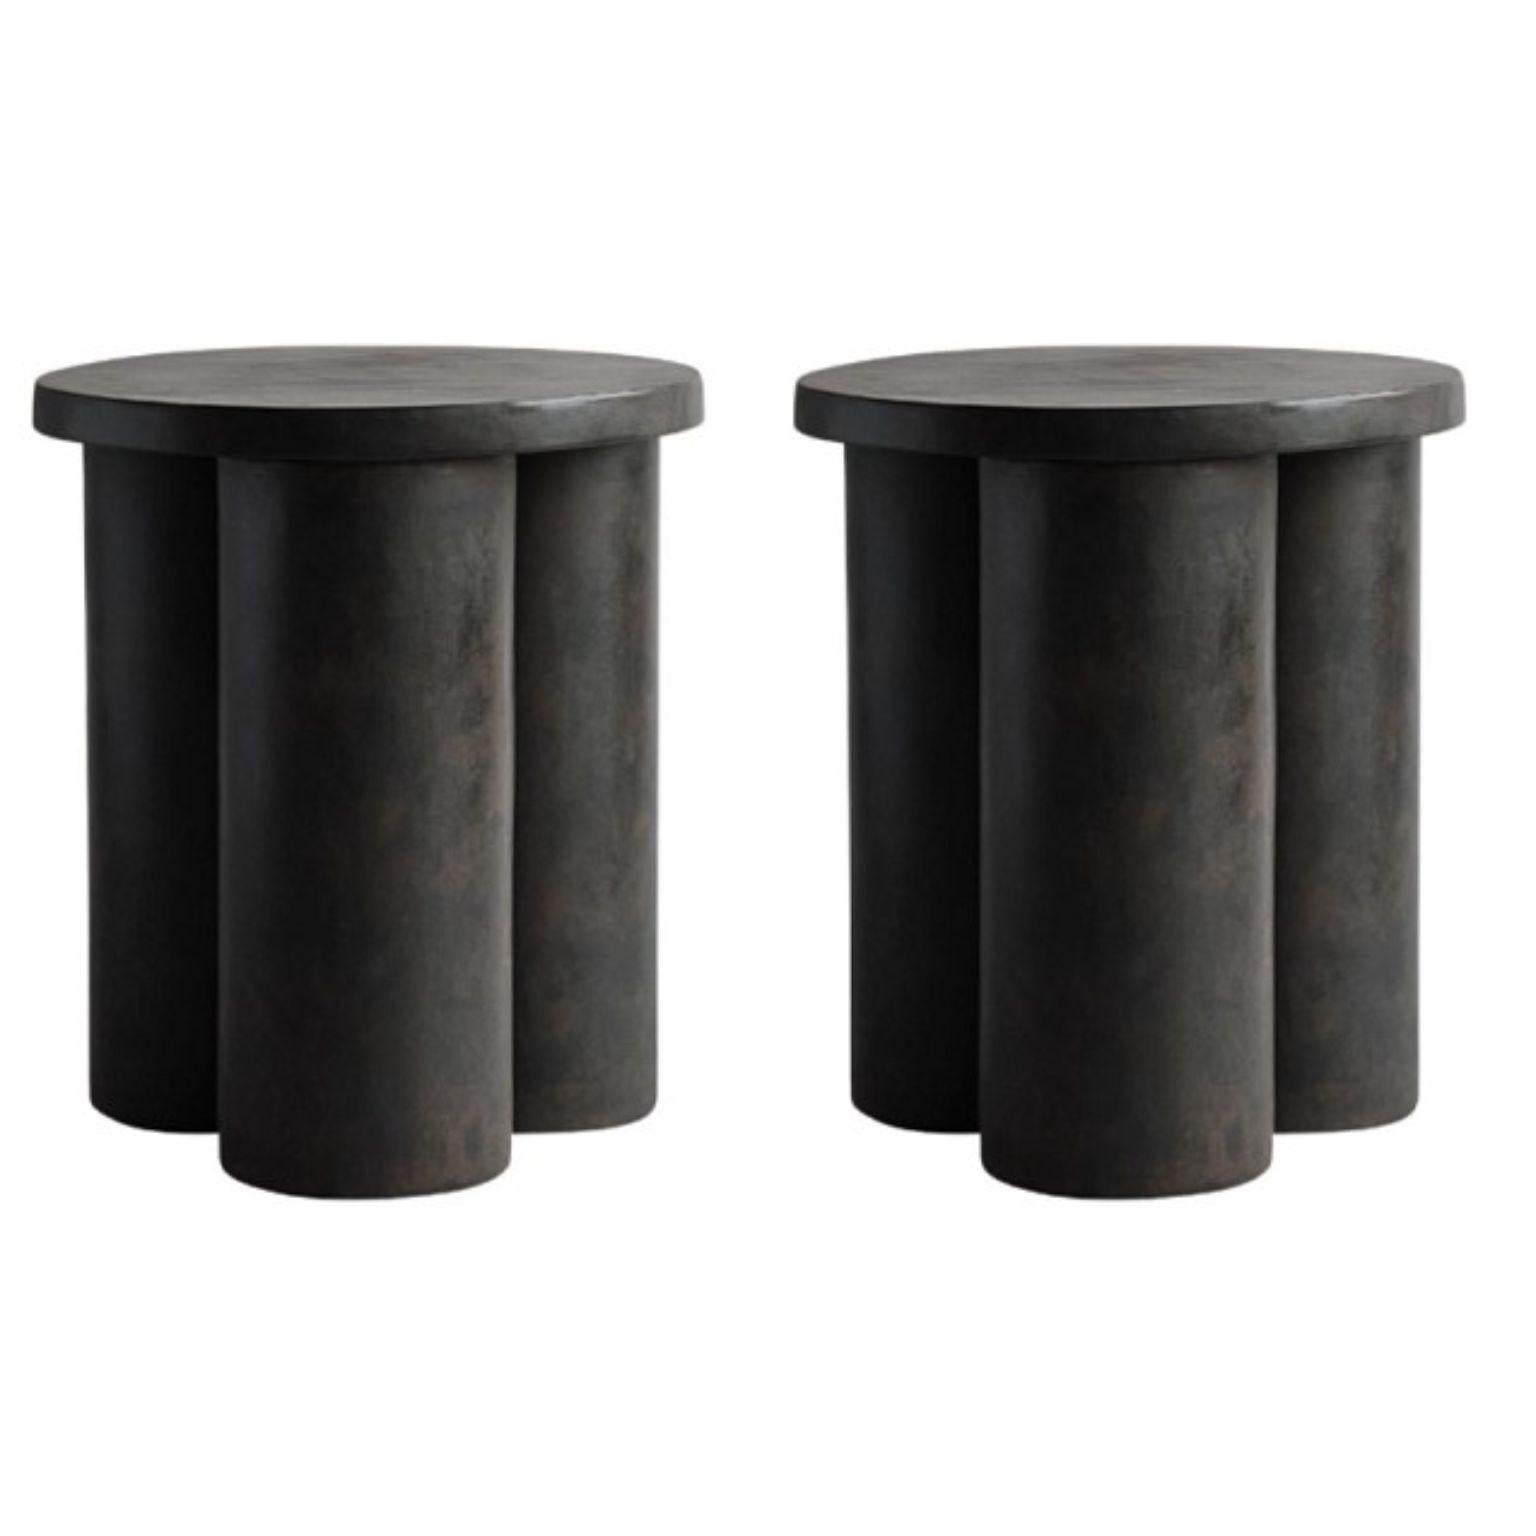 Set of 2 big foot tables tall by 101 Copenhagen
Designed by Kristian Sofus Hansen & Tommy Hyldahl
Dimensions: L 45 / W 45 /H 51 CM
Materials: fiber concrete

At first glance the Big Foots collection looks heavy and dense, yet on further inspection,